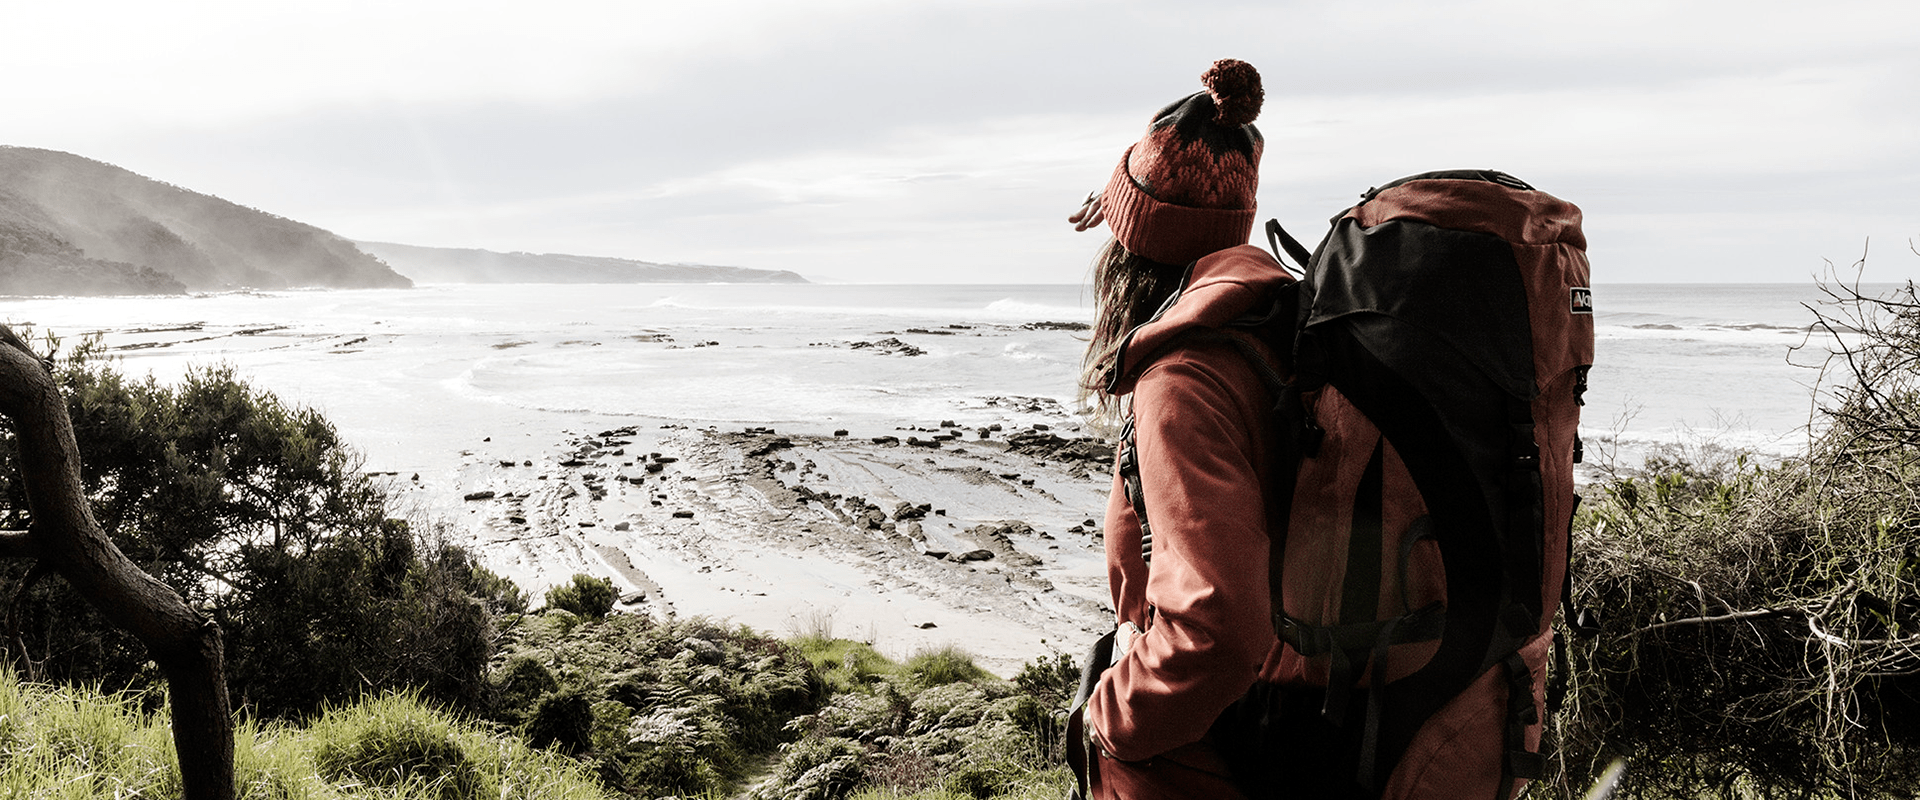 A hiker carrying an overnight pack looks forward to an ocean vista with a sandy path leading down to the beach.